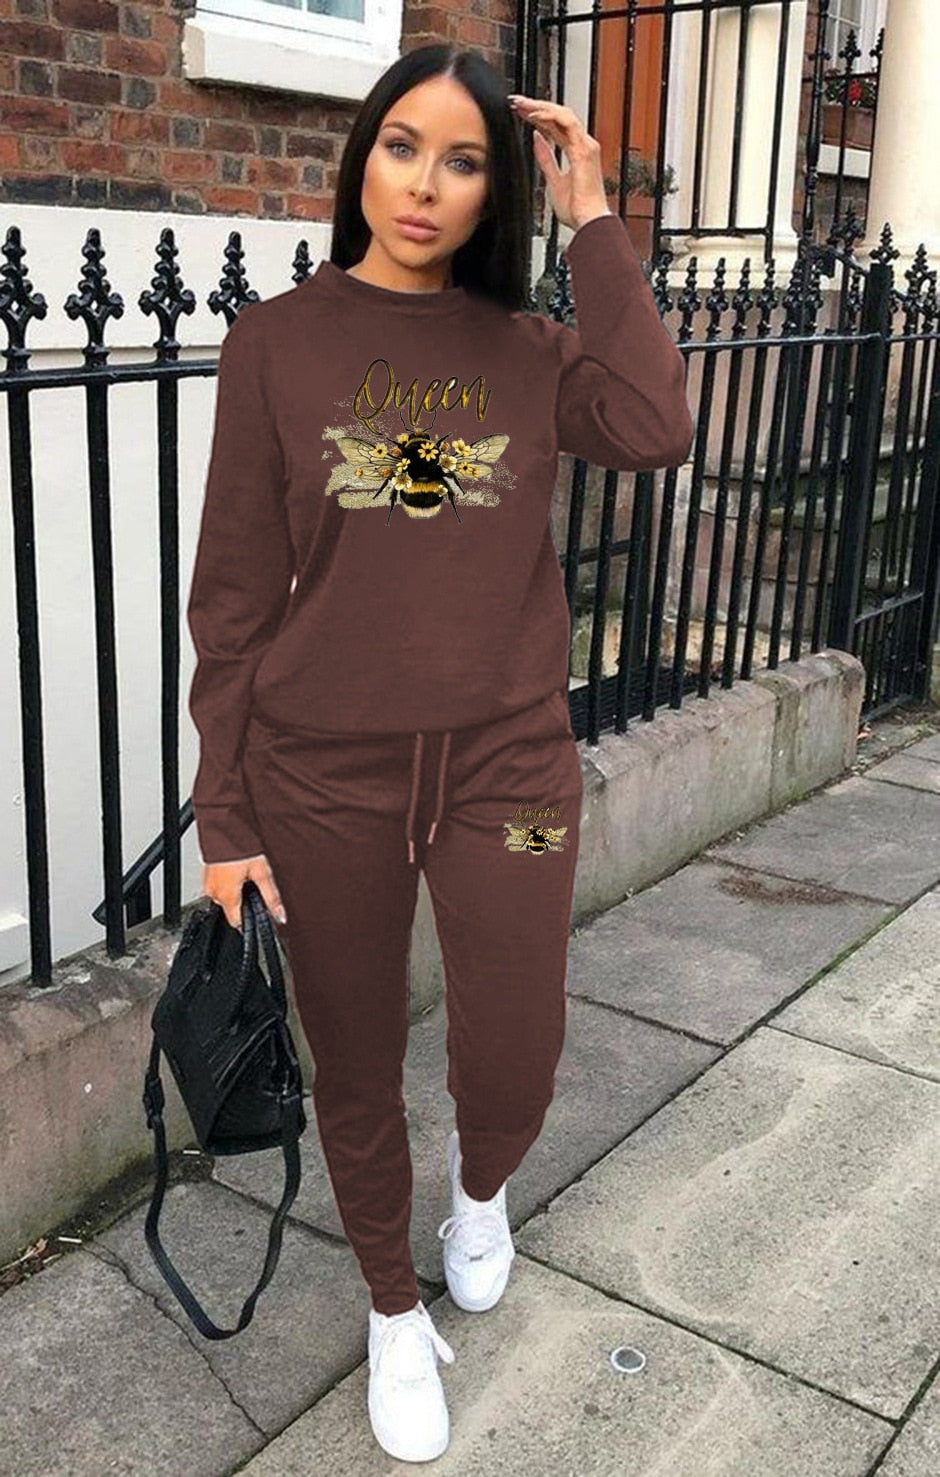 "QUEEN" Long sleeve Tops and Pants set